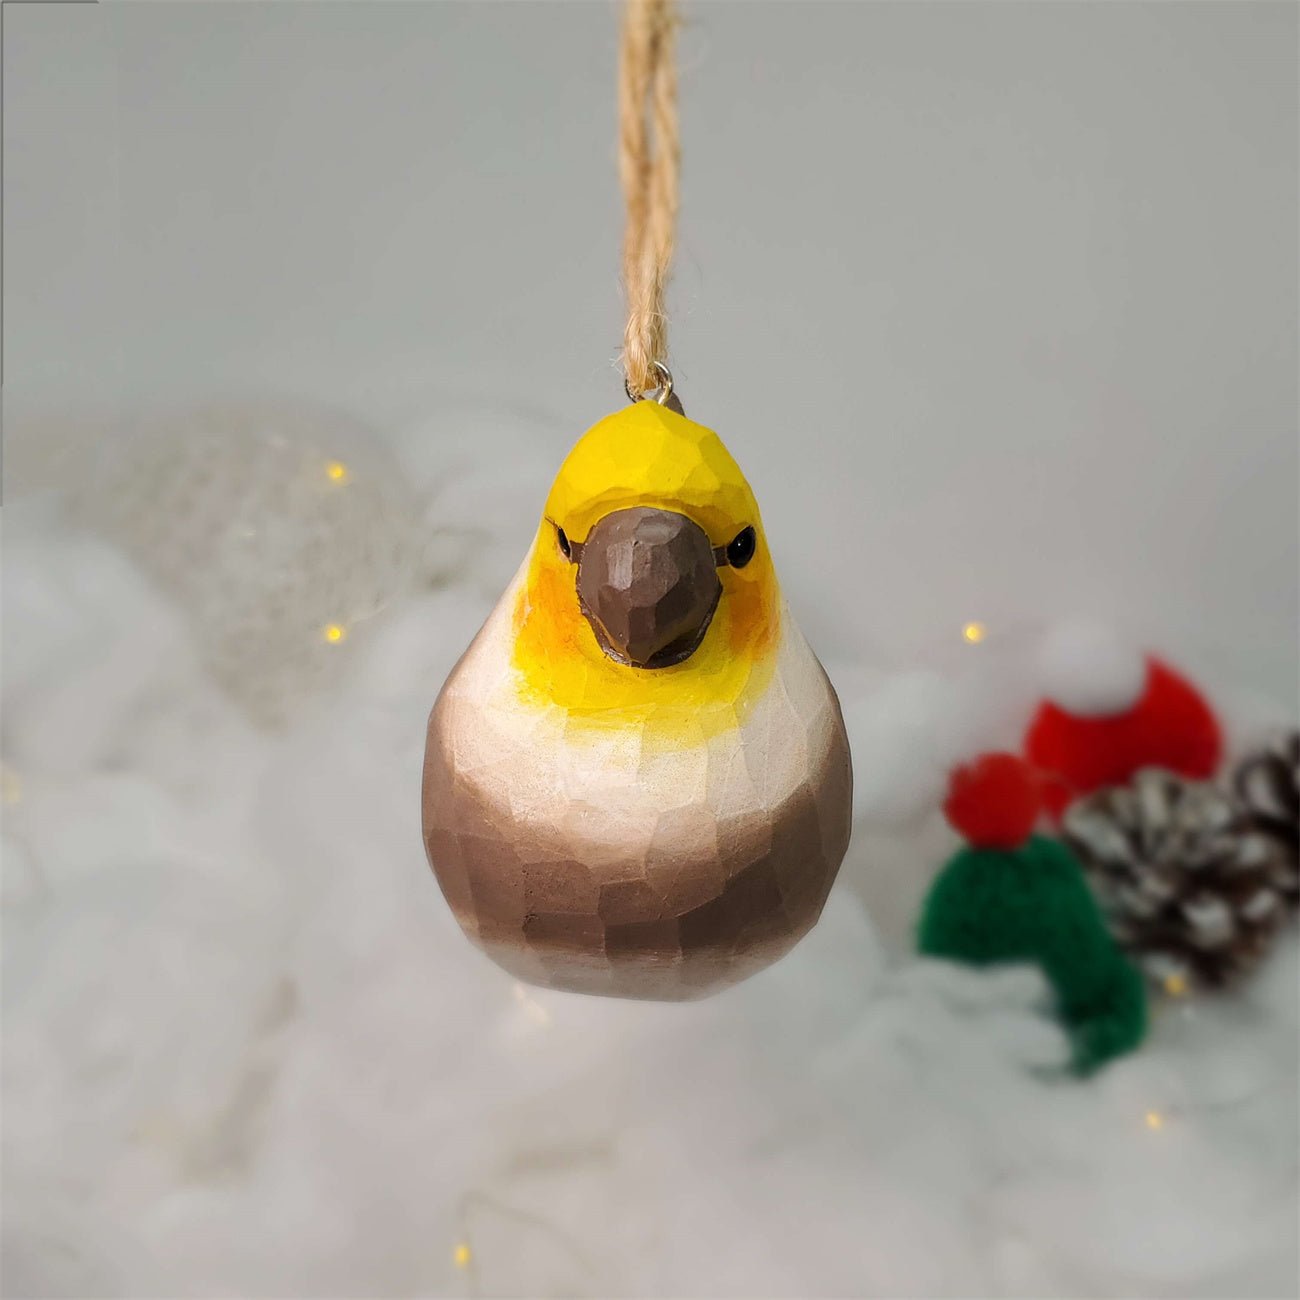 Cockatiel Carved and Painted Wooden Bird Ornaments - PAINTED BIRD SHOP